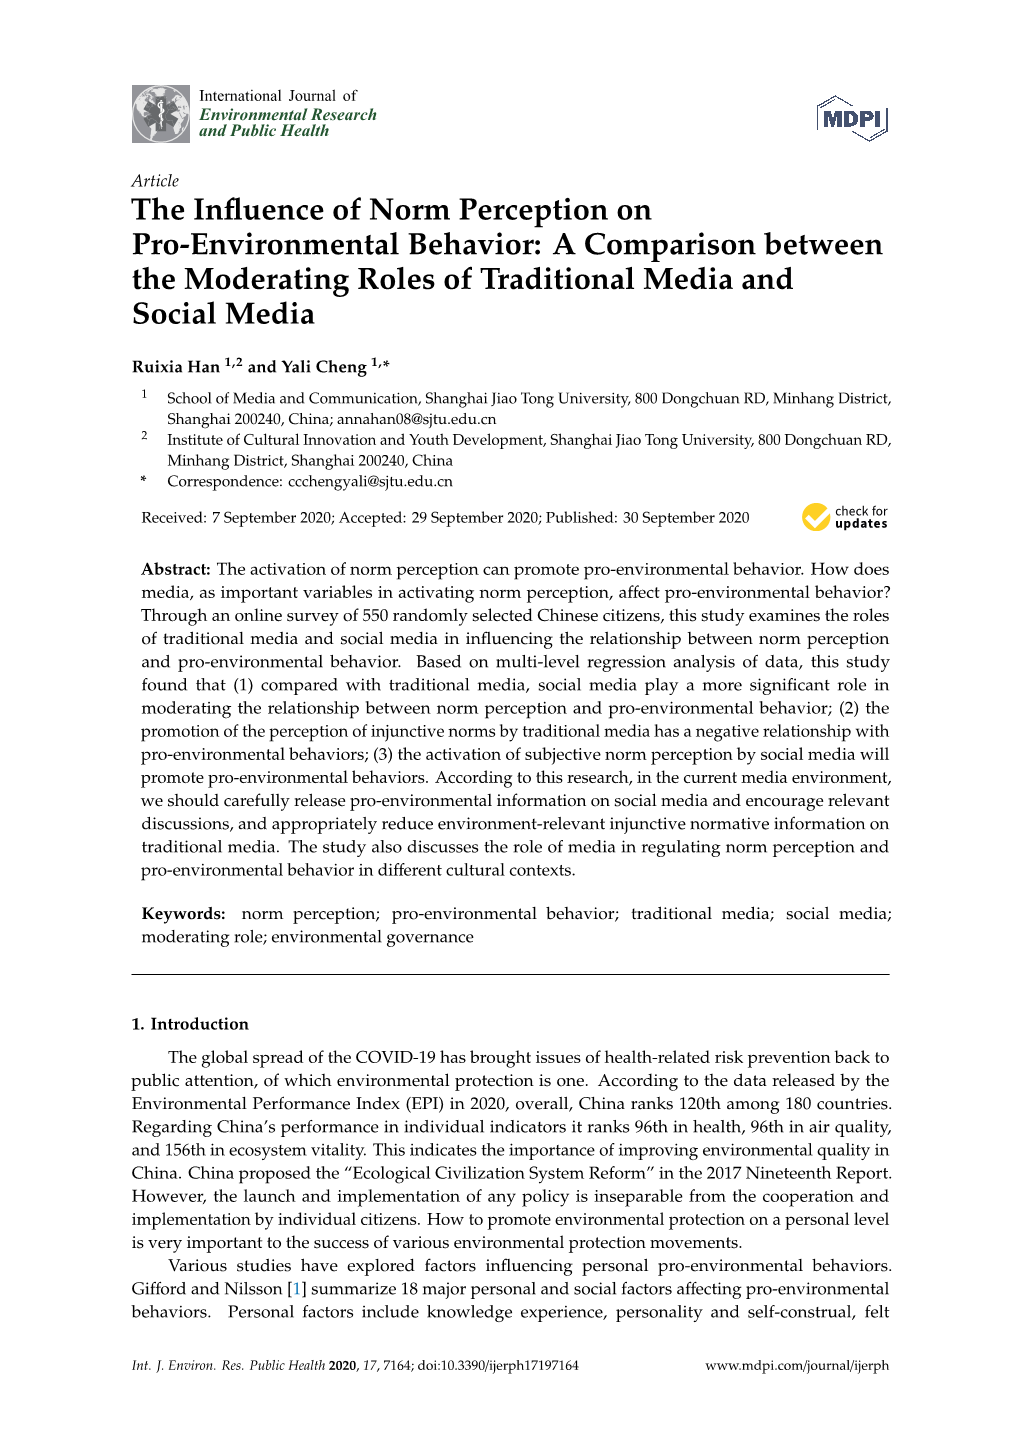 The Influence of Norm Perception on Pro-Environmental Behavior